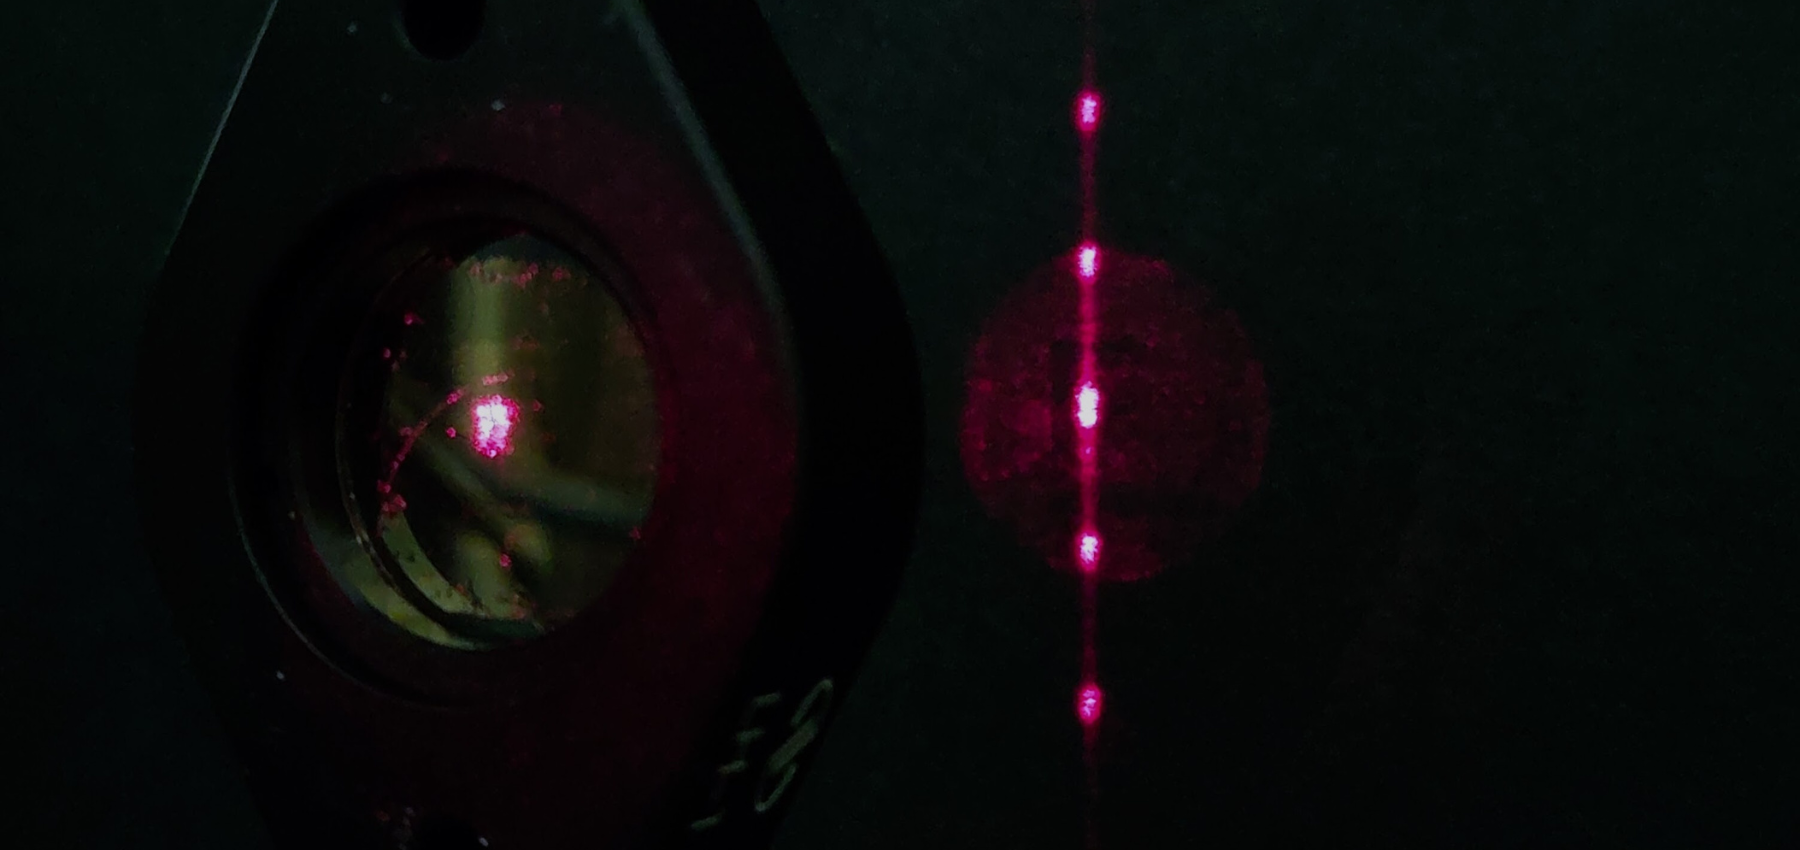 Grating in action, producing a diffraction pattern with a red laser